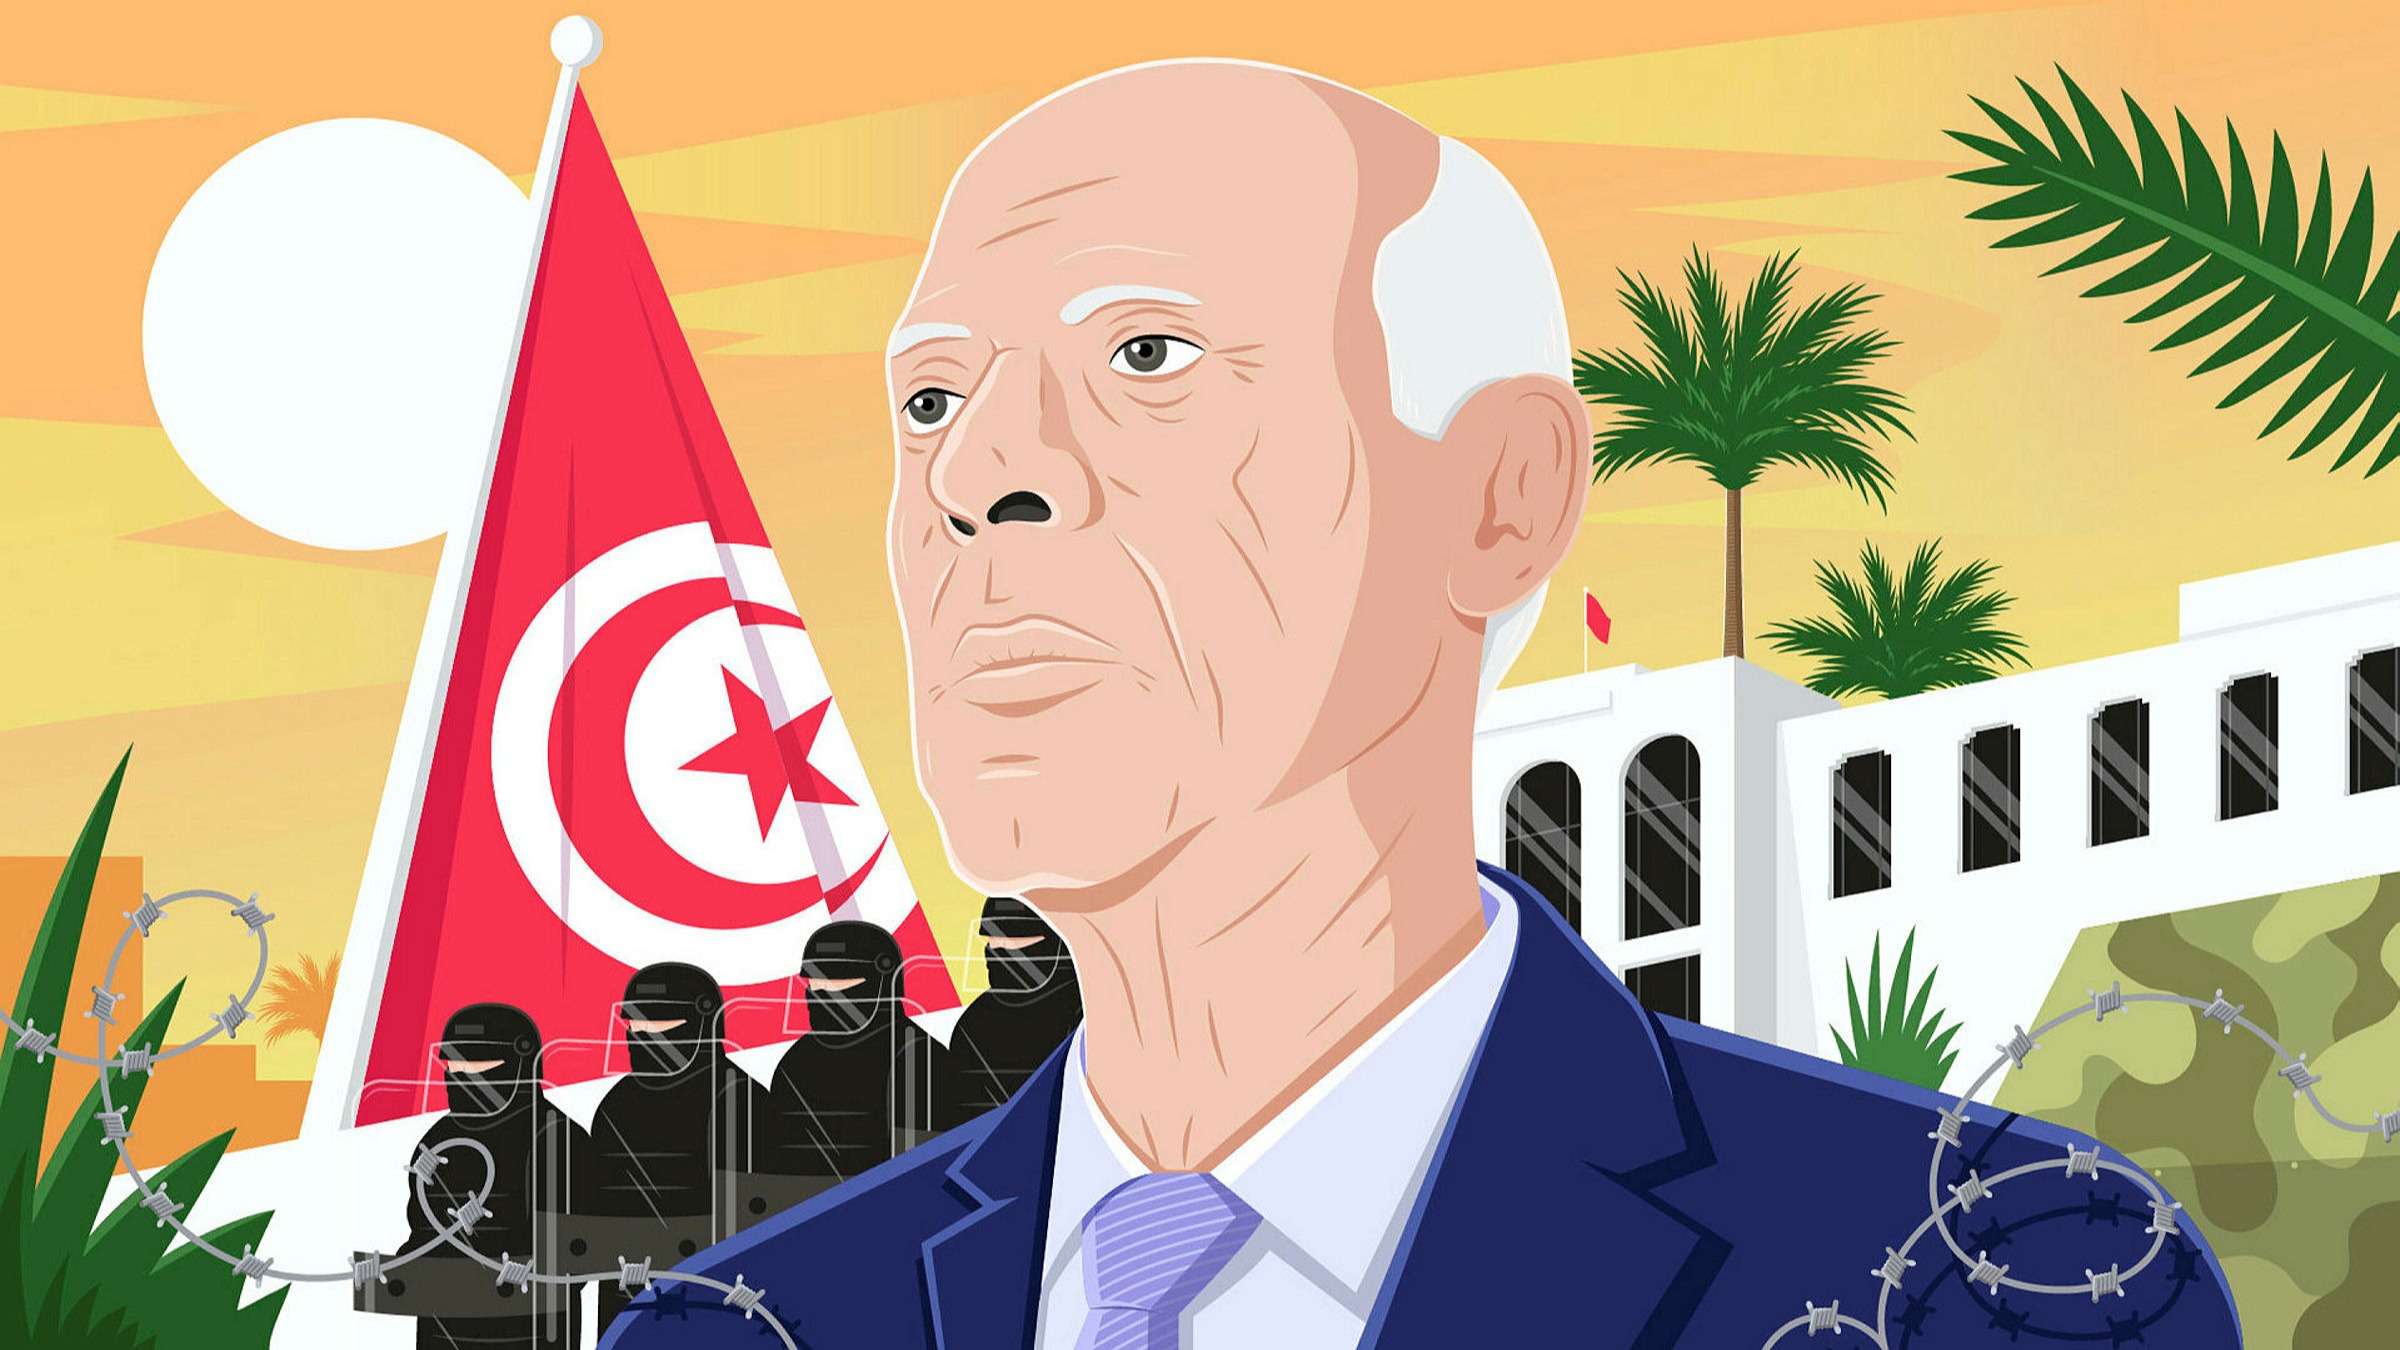 Human Rights Watch alerts to Tunisia’s authoritarian drift under President Saied